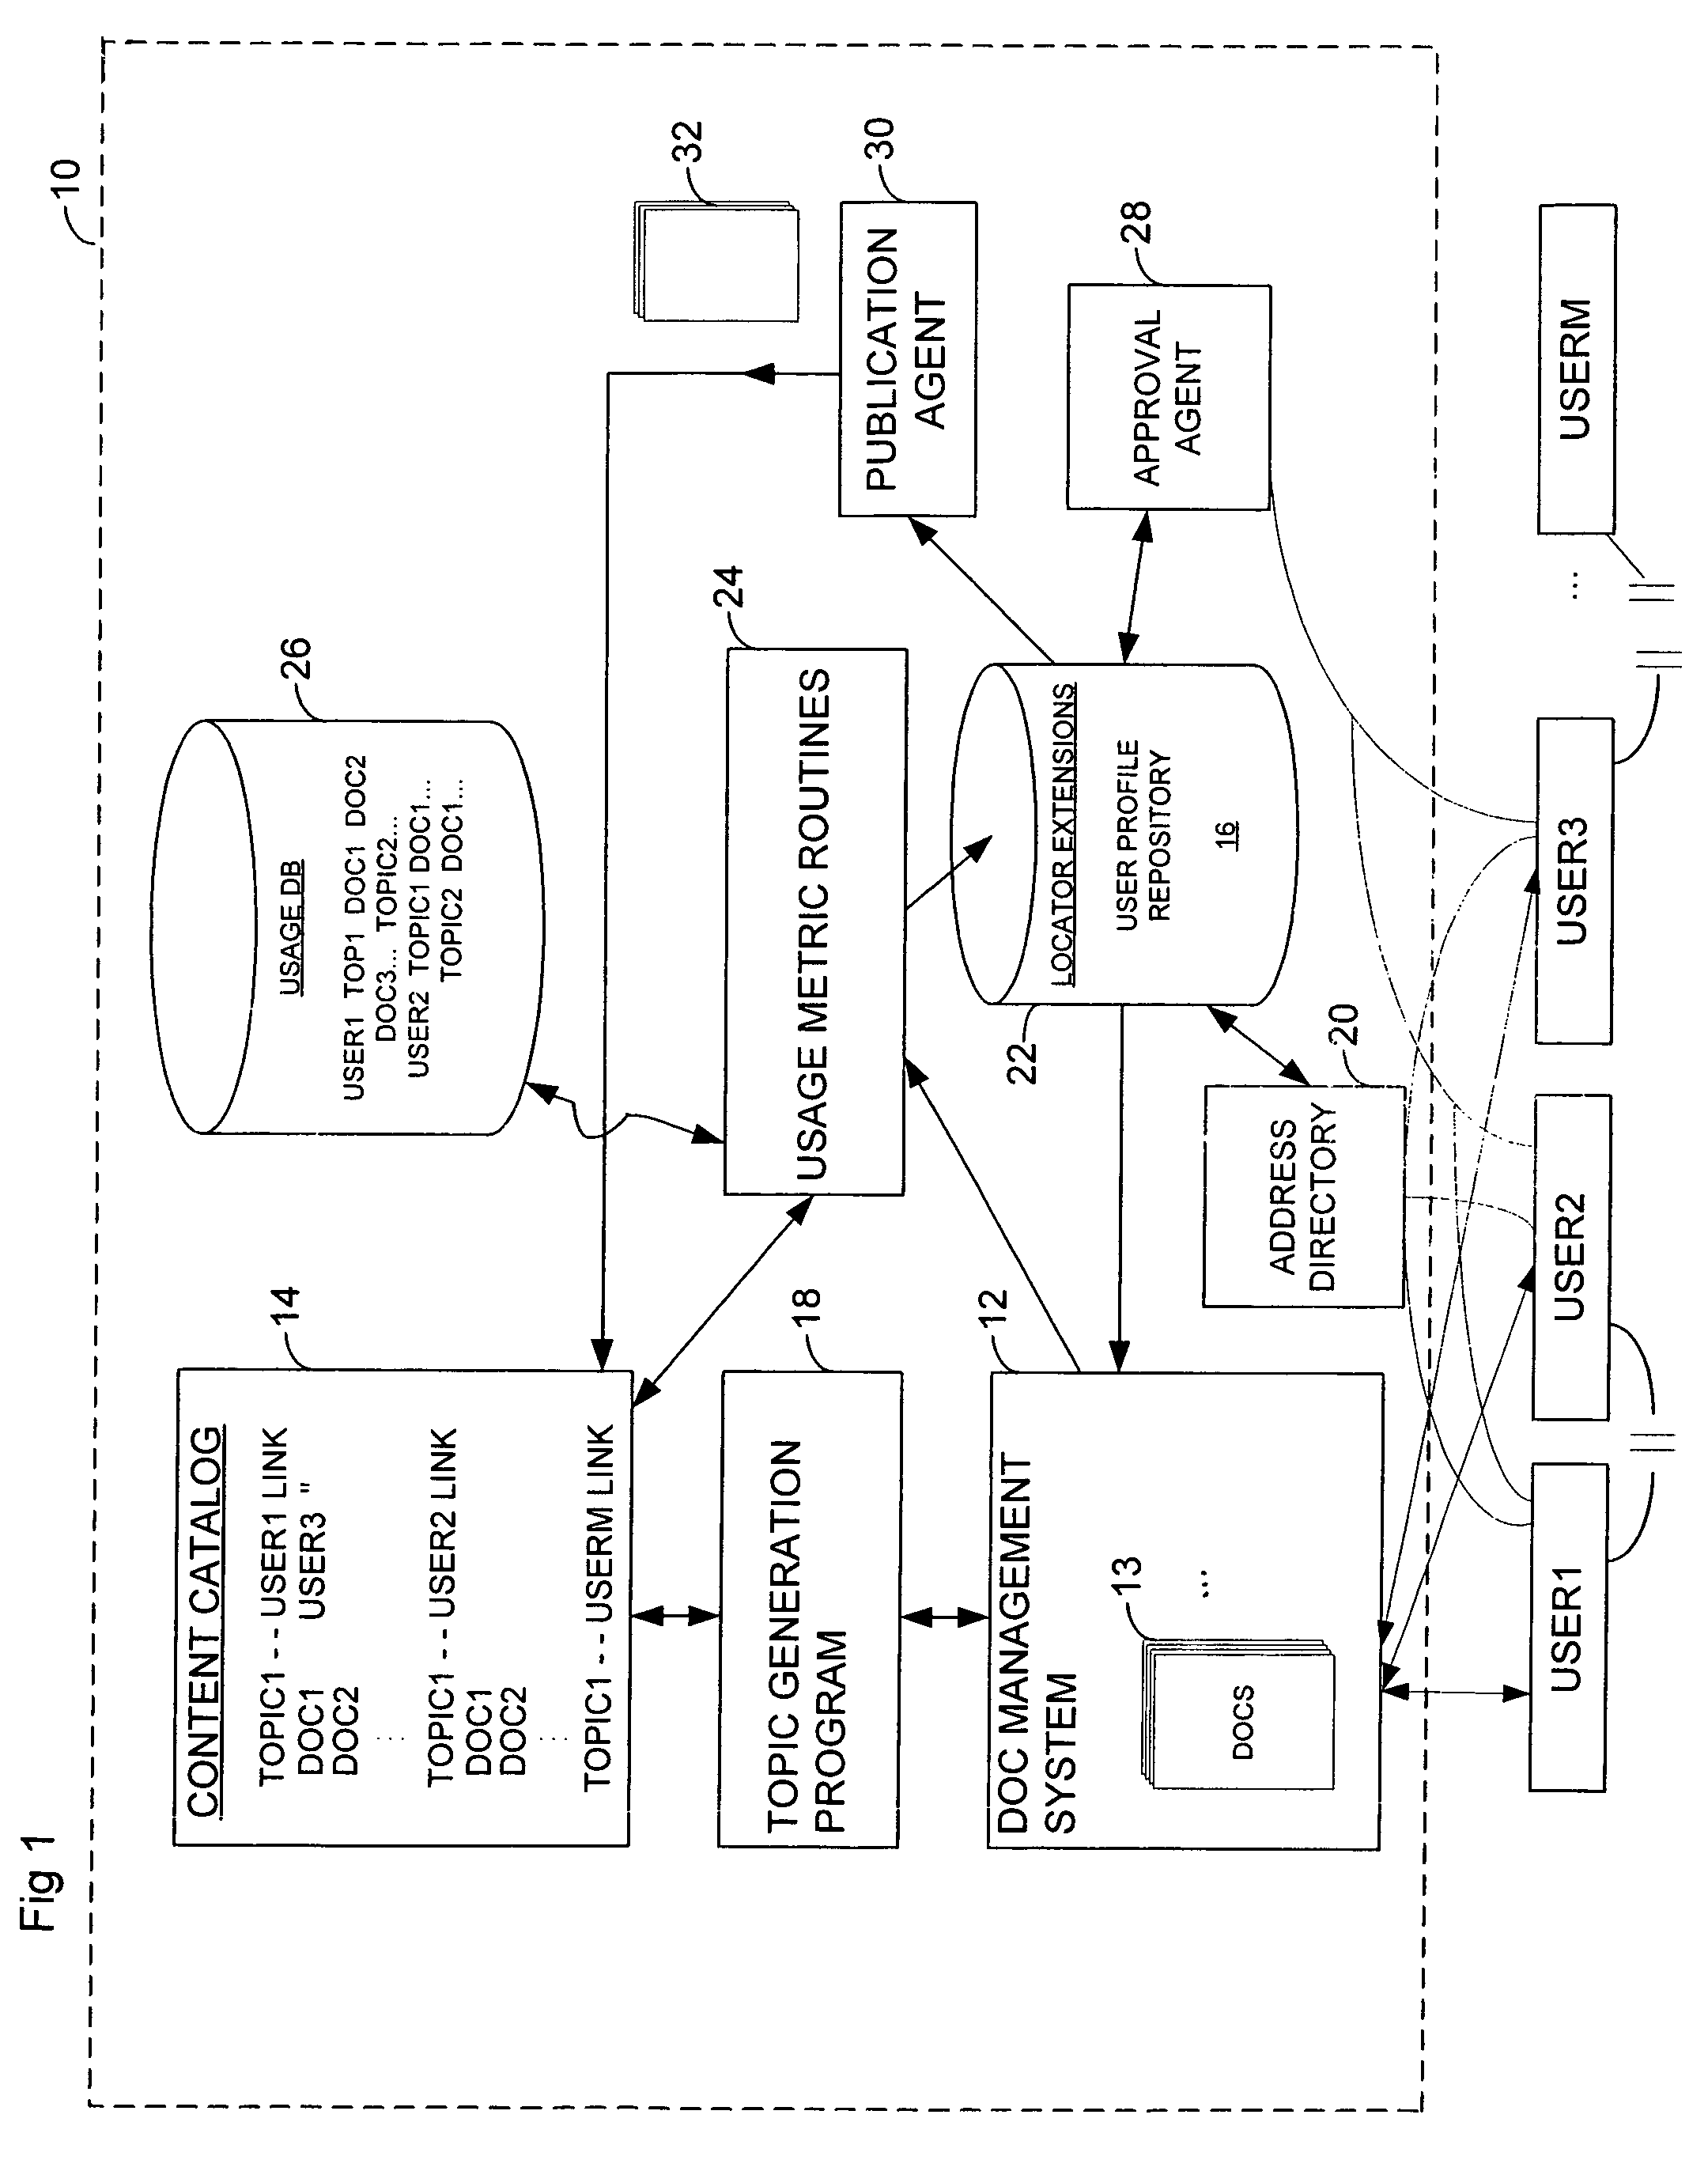 Method and system for profiling users based on their relationships with content topics